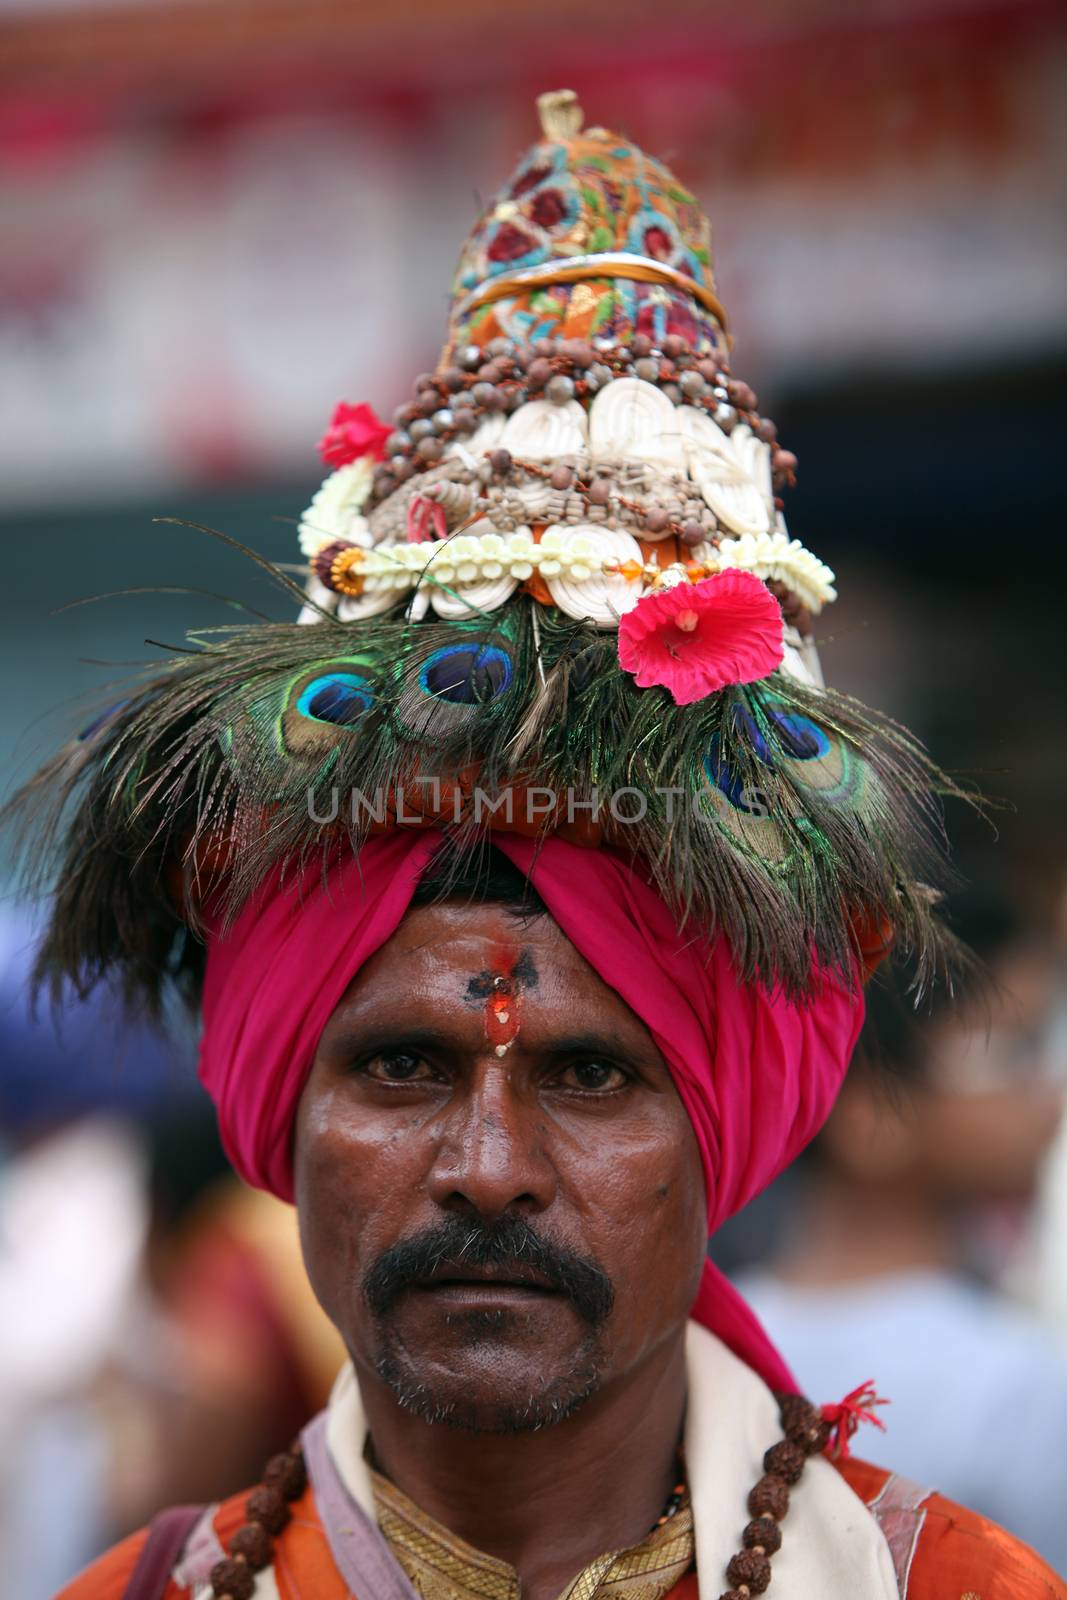 Pune, India - July 11, 2015: A portrait of a Vasudev, pilgrims w by thefinalmiracle